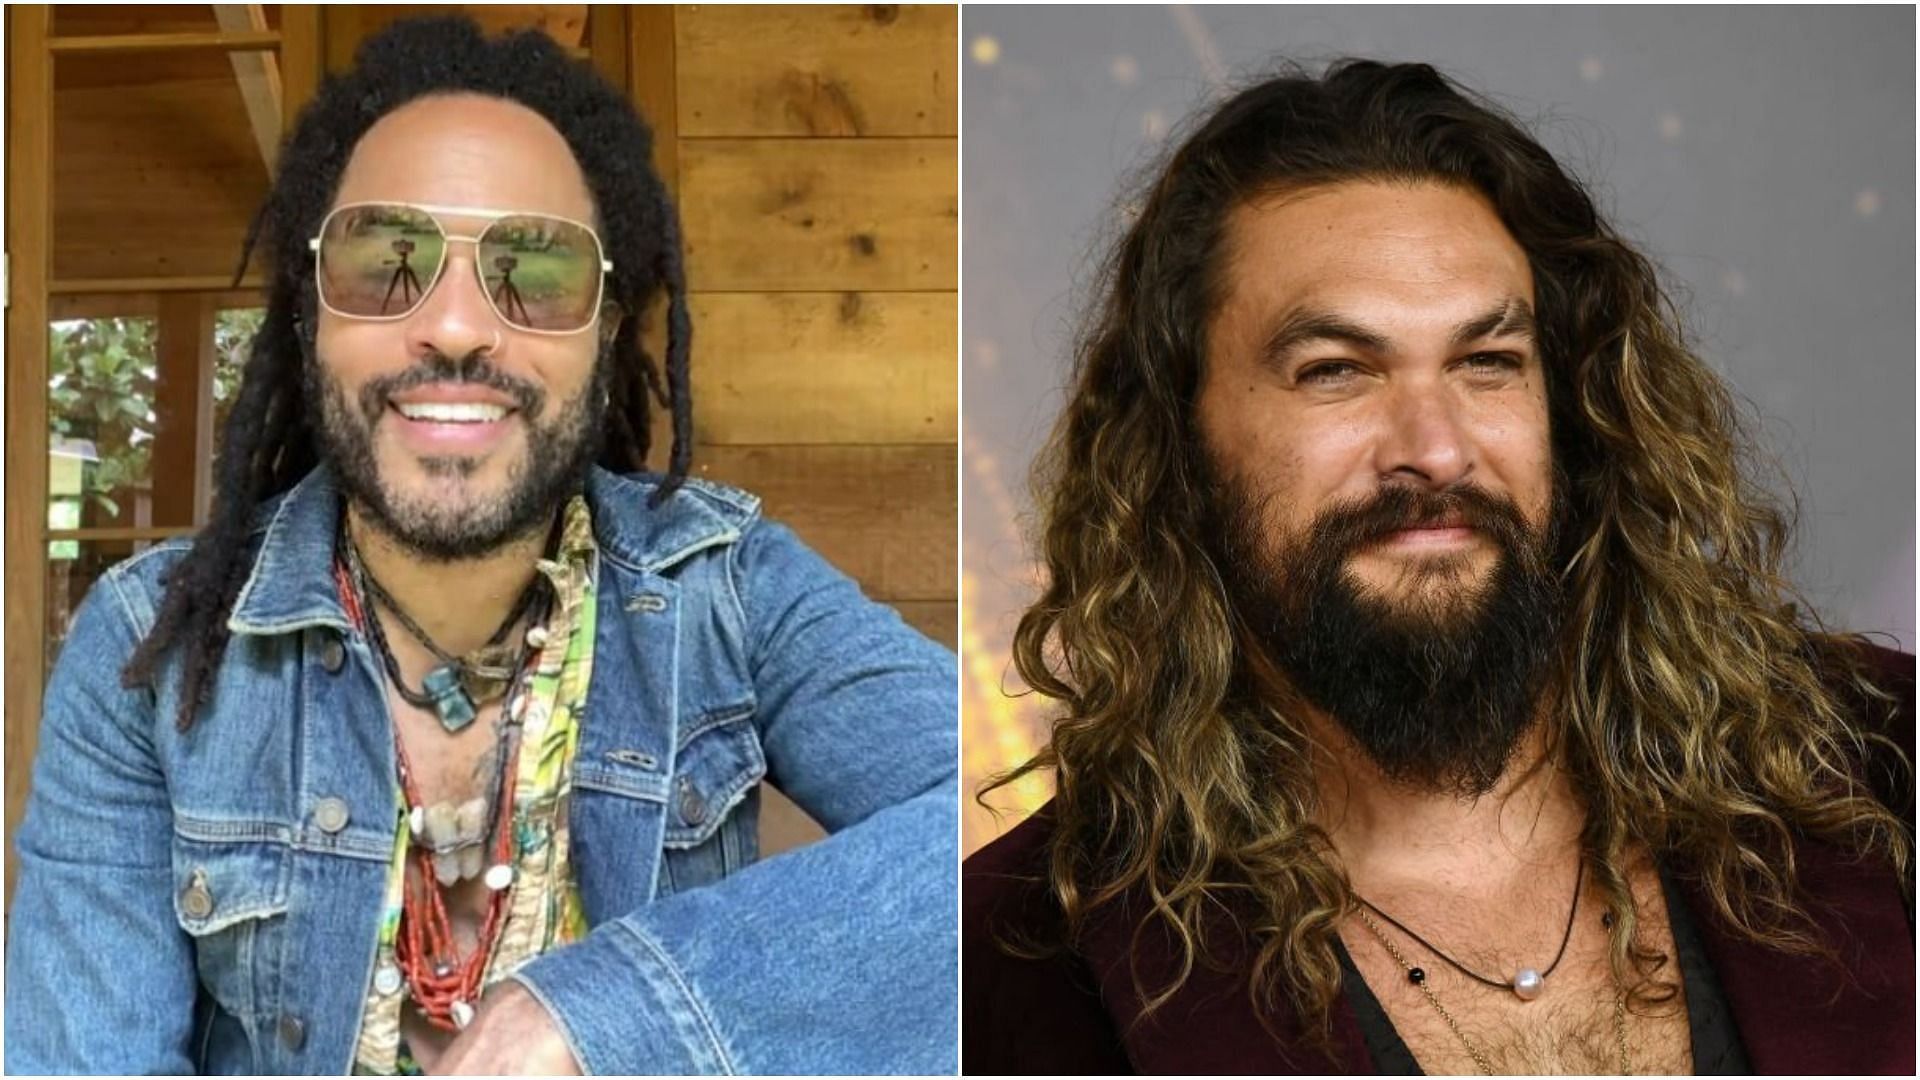 Lenny Kravitz and Jason Momoa have been best friends for 20 years (Images via Bravo and Jeff Spicer/Getty Images)